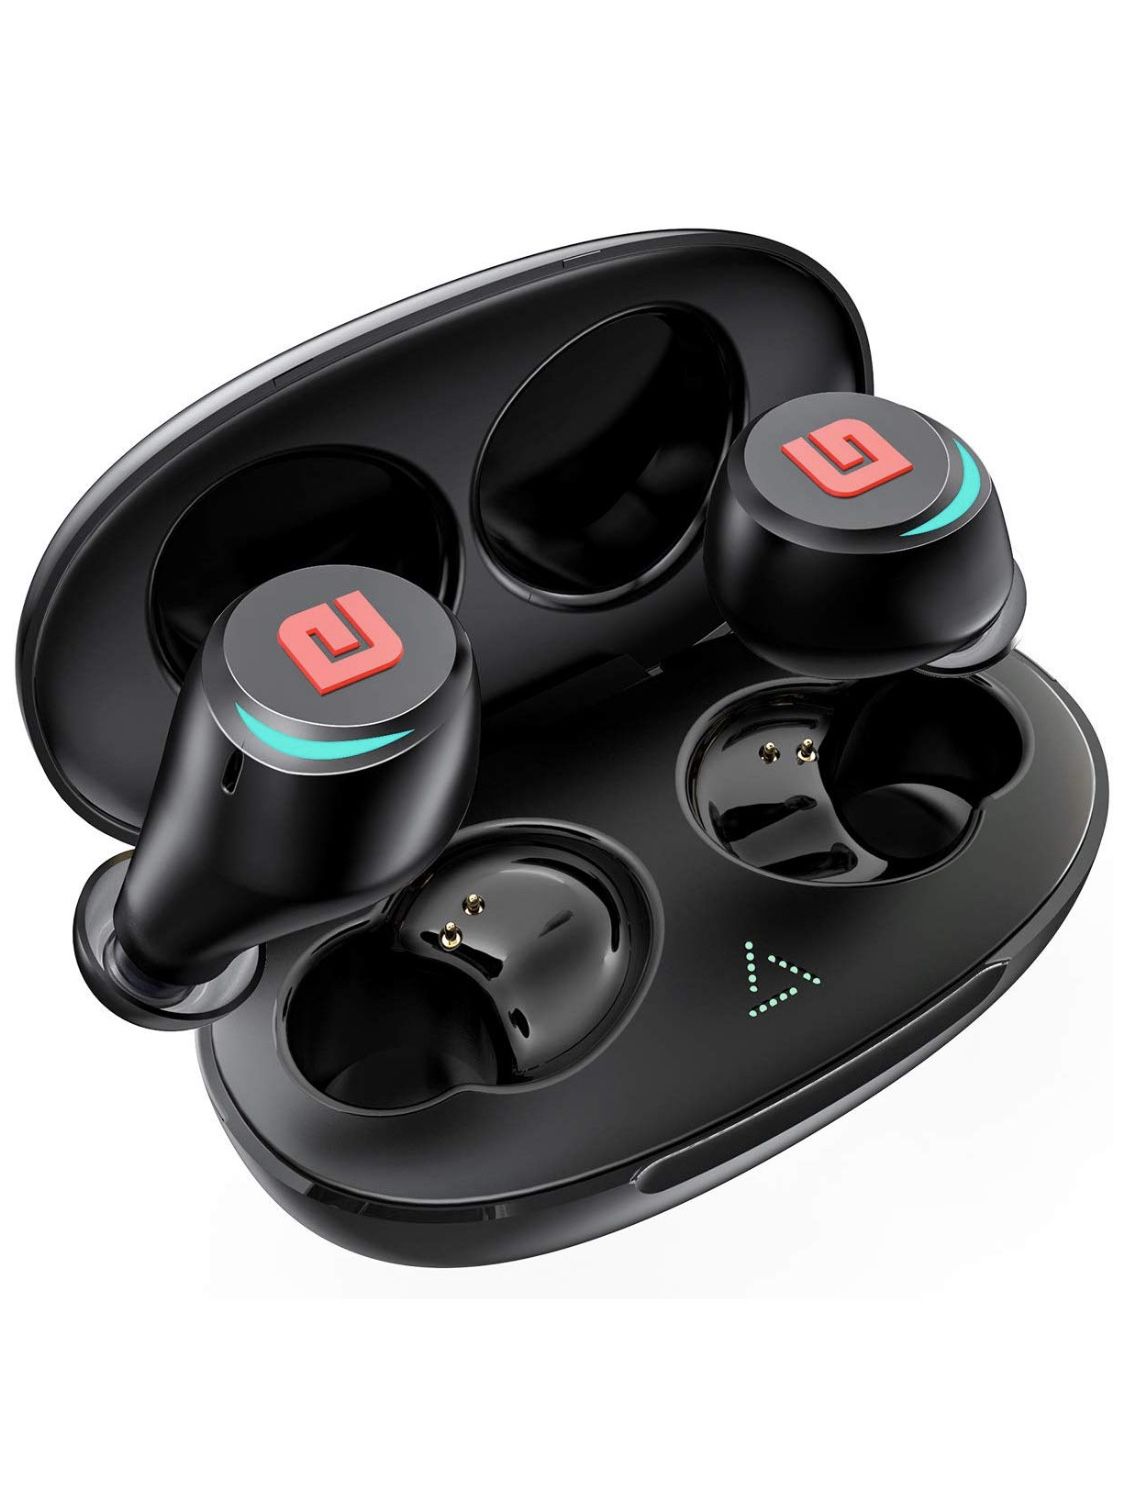 Wireless Earbuds Bluetooth 5.0 Headphones, Dual Master Direct Connect in-Ear TWS Ear Buds IPX6 Waterproof Stereo Call/w Mic Instant Pair Low Lat